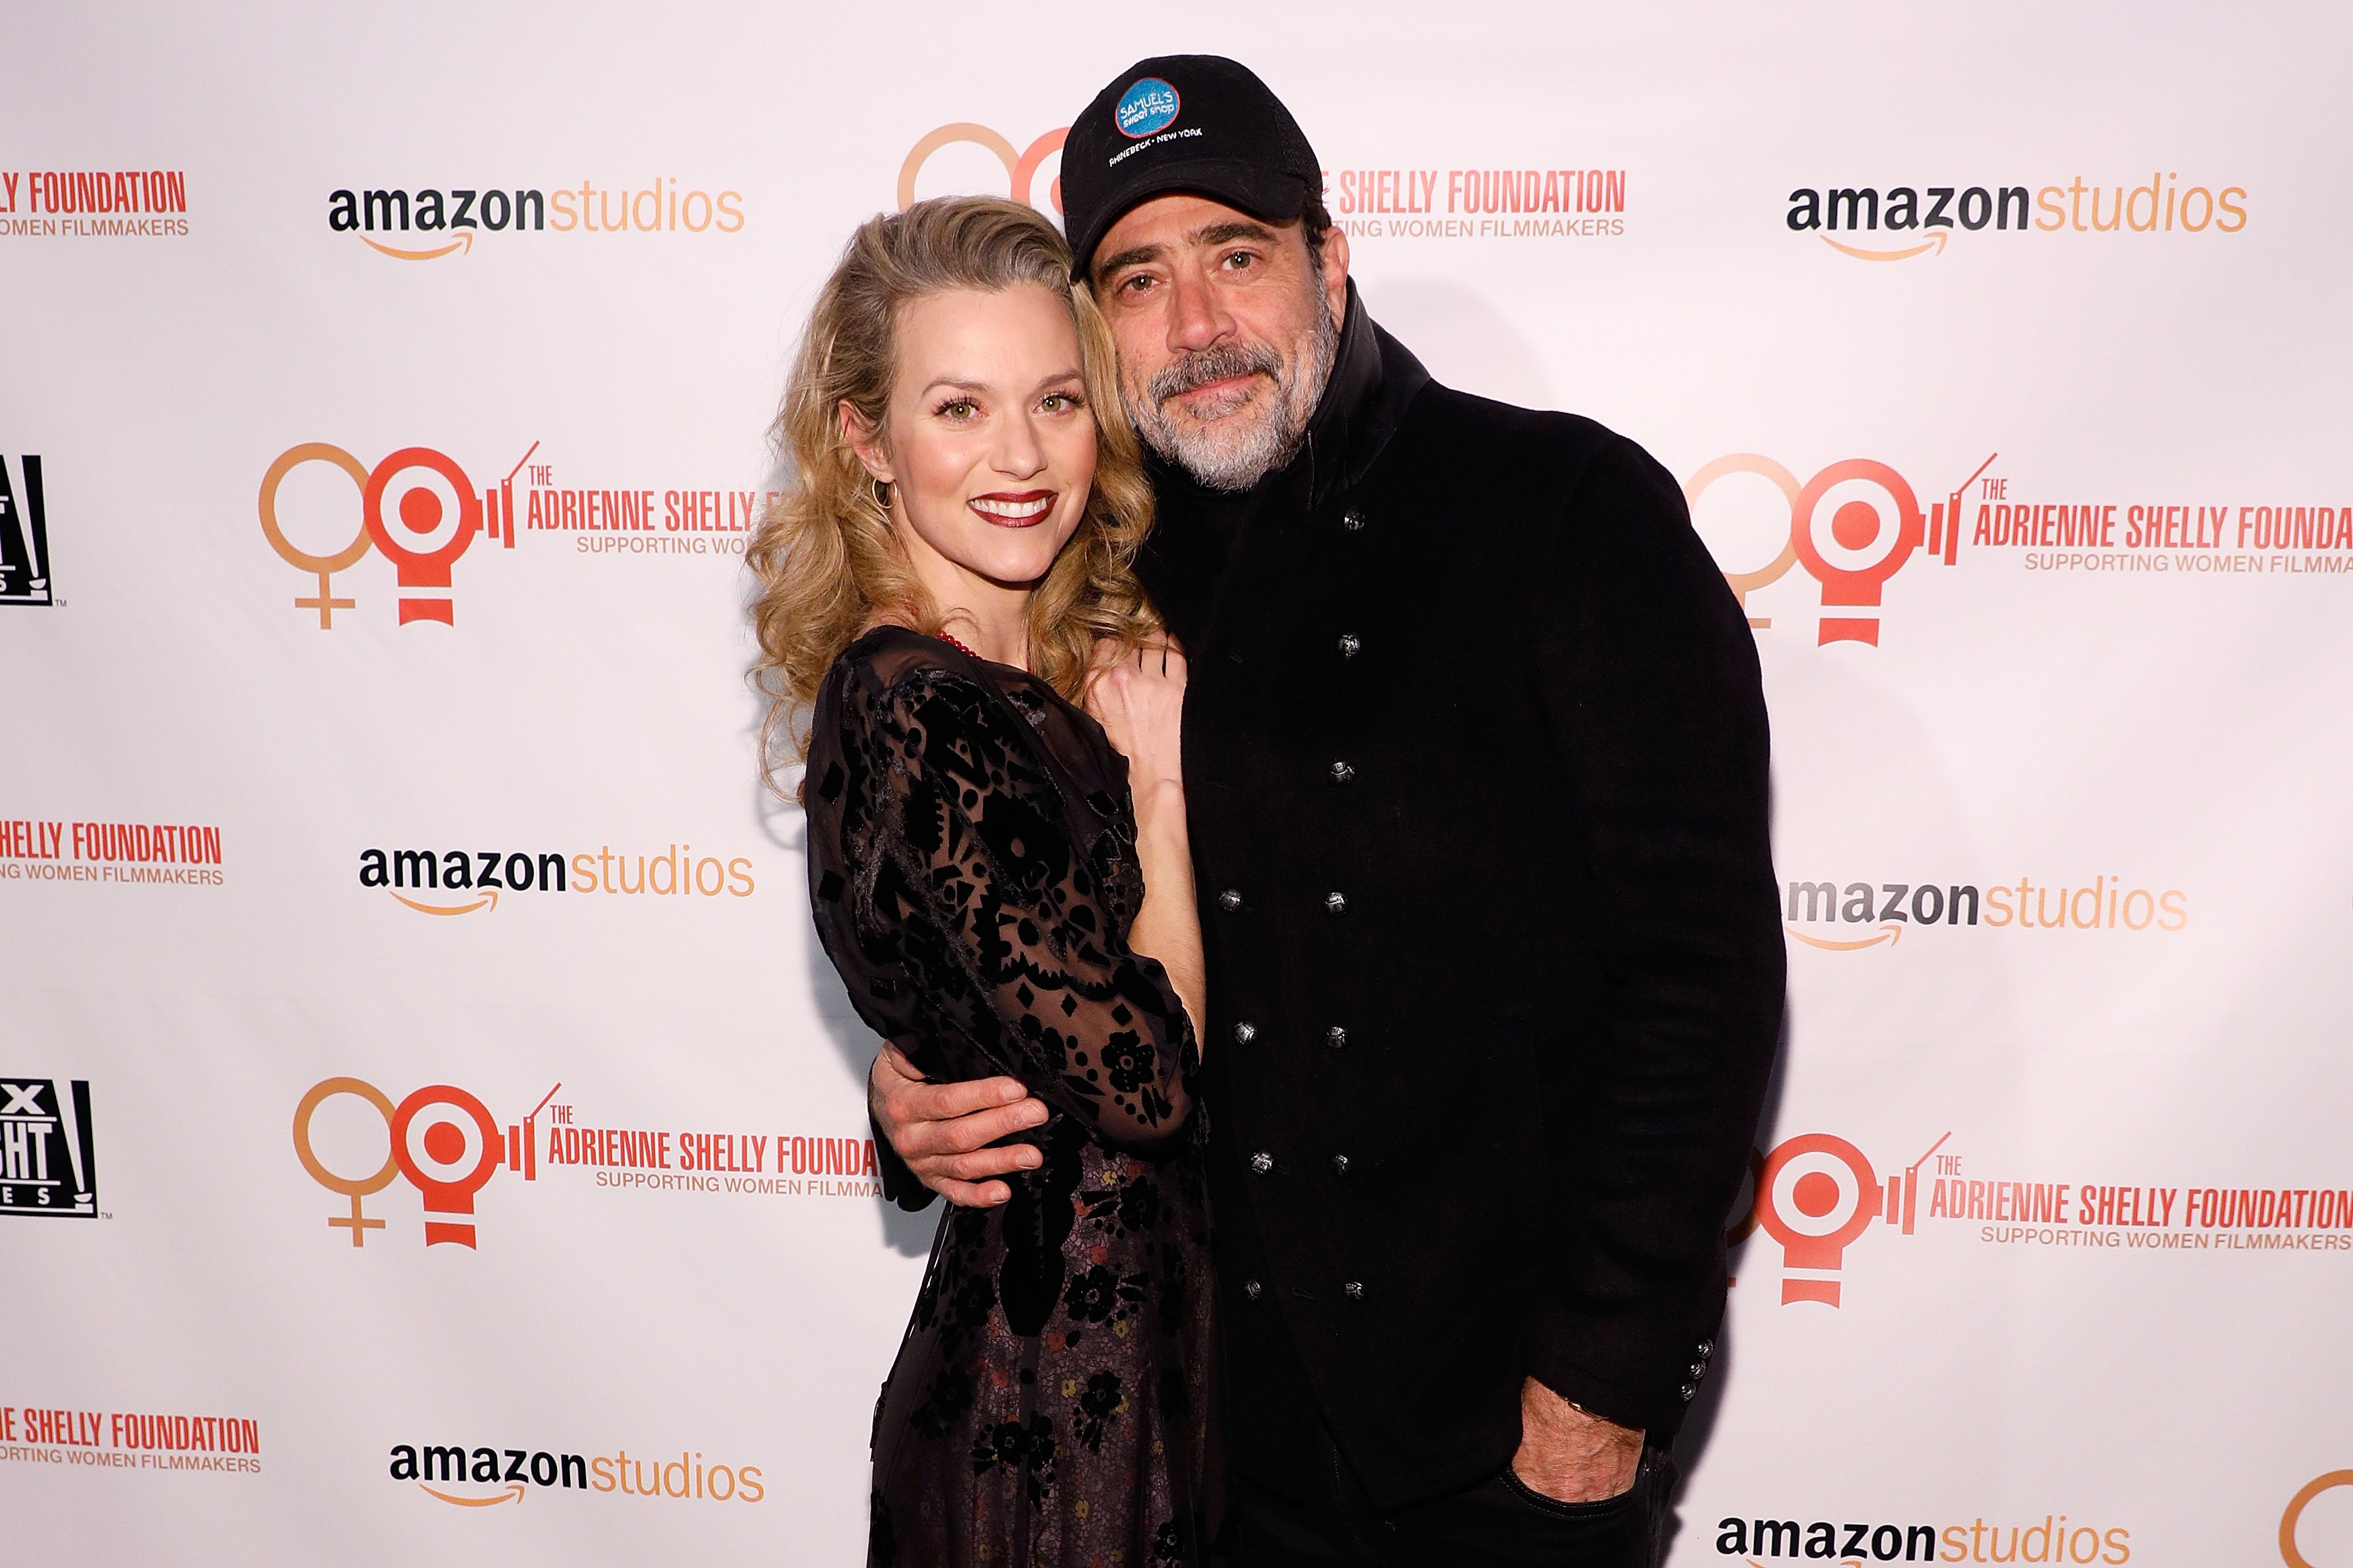 Hilarie Burton and Jeffrey Dean Morgan during the Adrienne Shelly Foundation 10th Anniversary Gala on December 5, 2016 in New York City. | Source: Getty Images